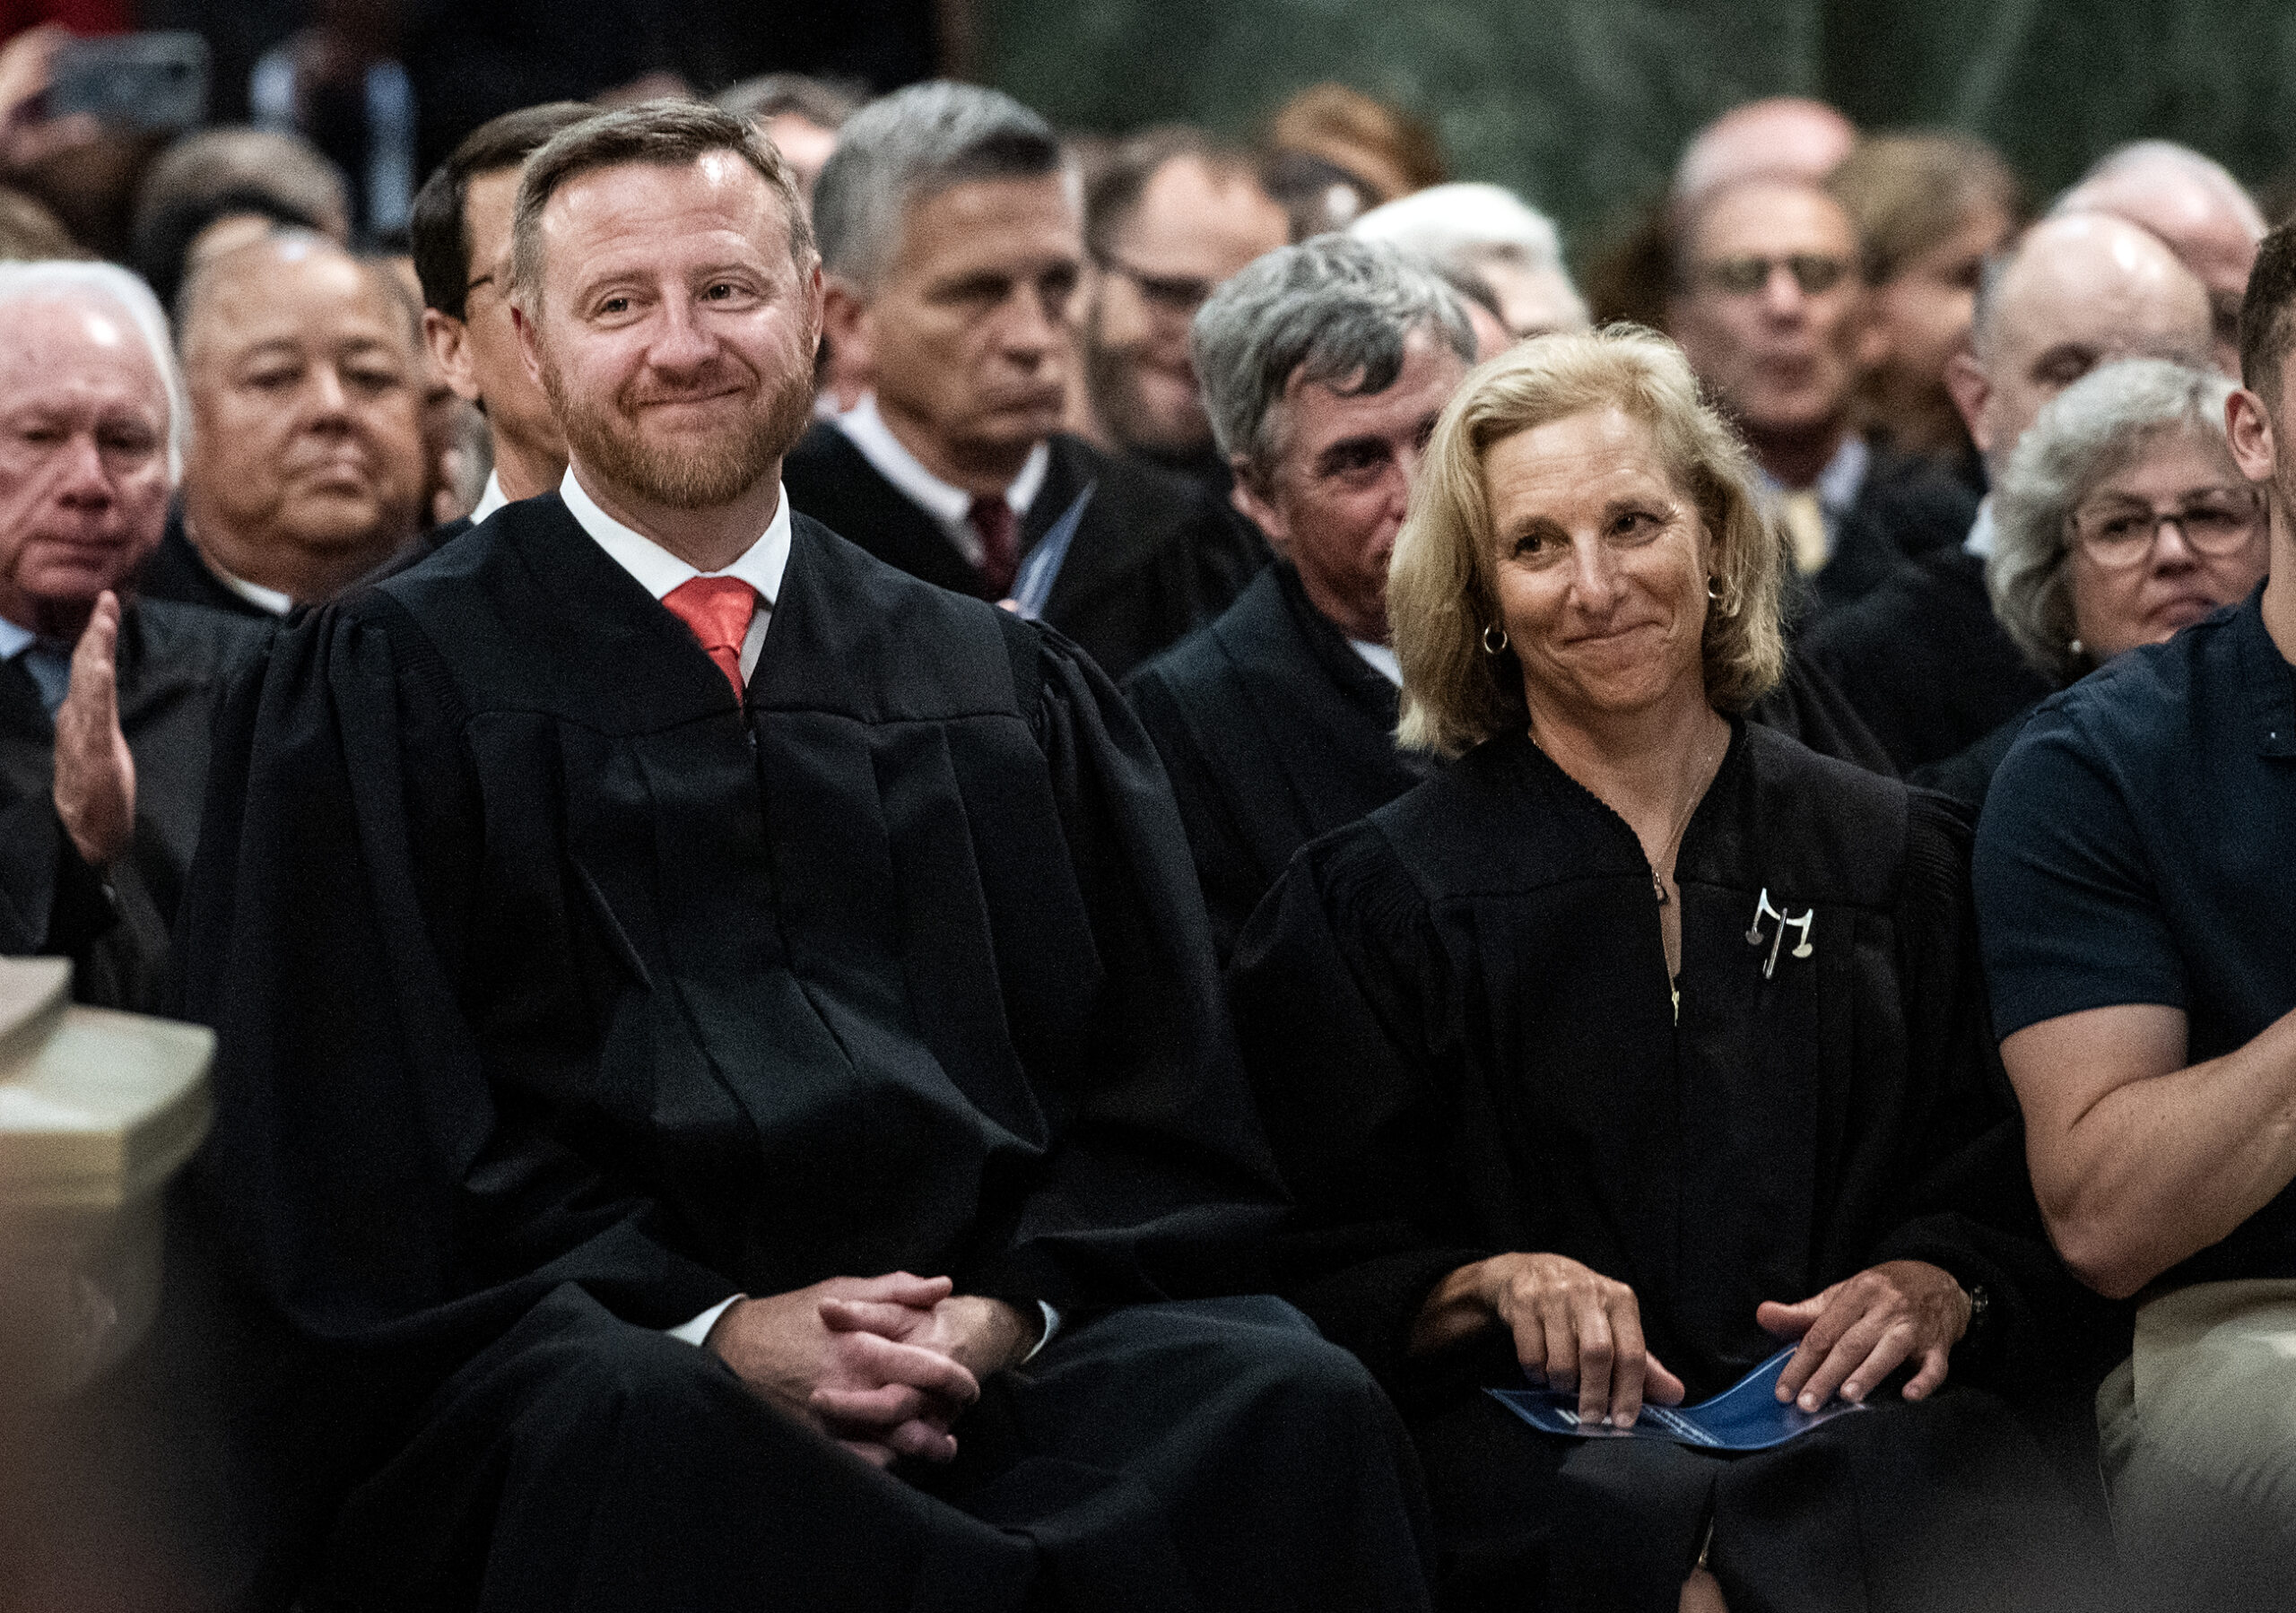 Two justices smile as they sit together in a crowd.